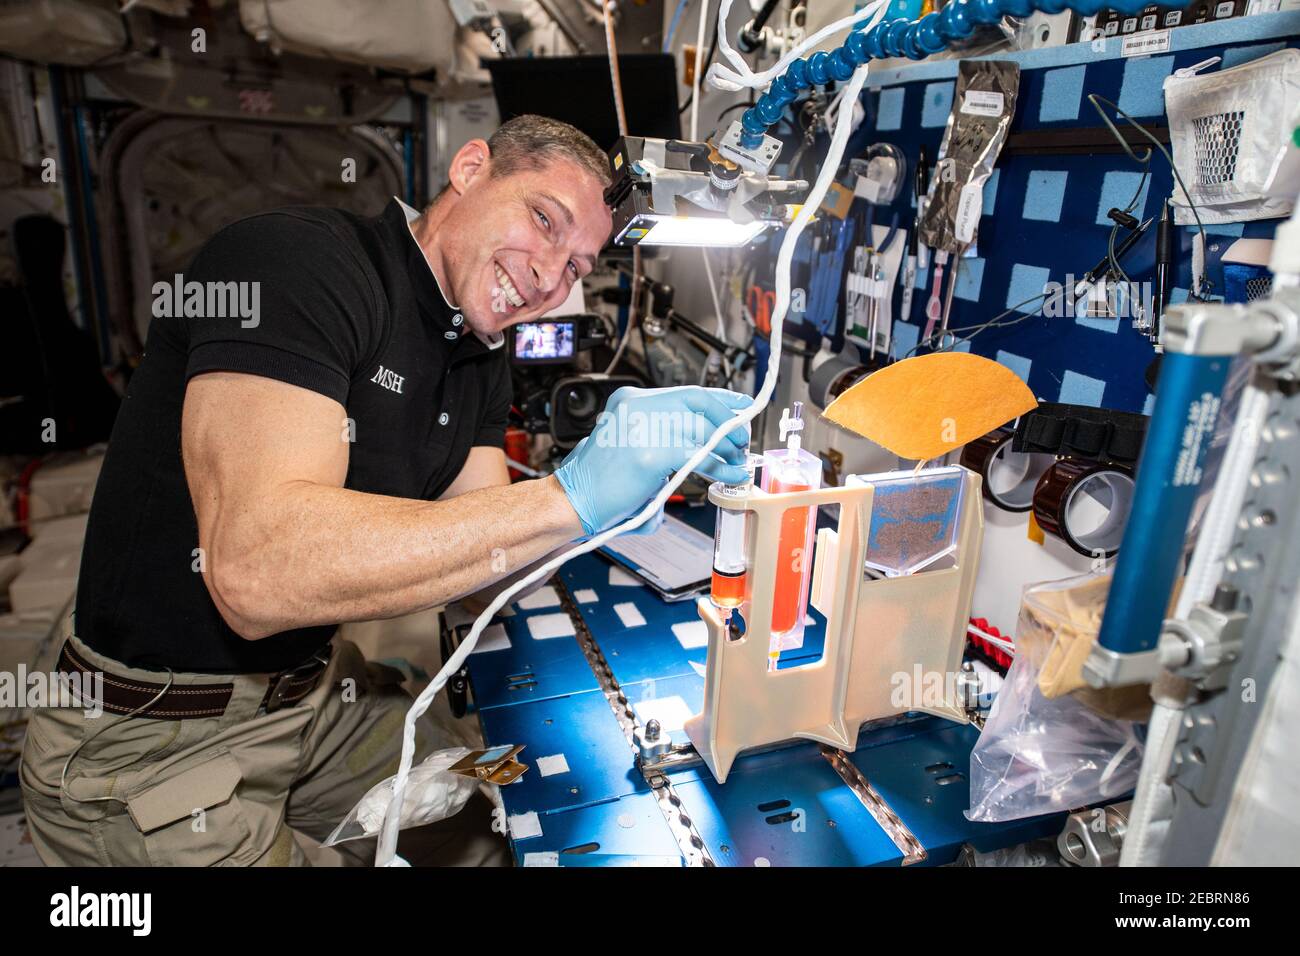 NASA astronaut and Expedition 64 Flight Engineer Michael Hopkins works on hydroponics components for the Plant Water Management study aboard the International Space Station February 8, 2021 in Earth Orbit. Stock Photo